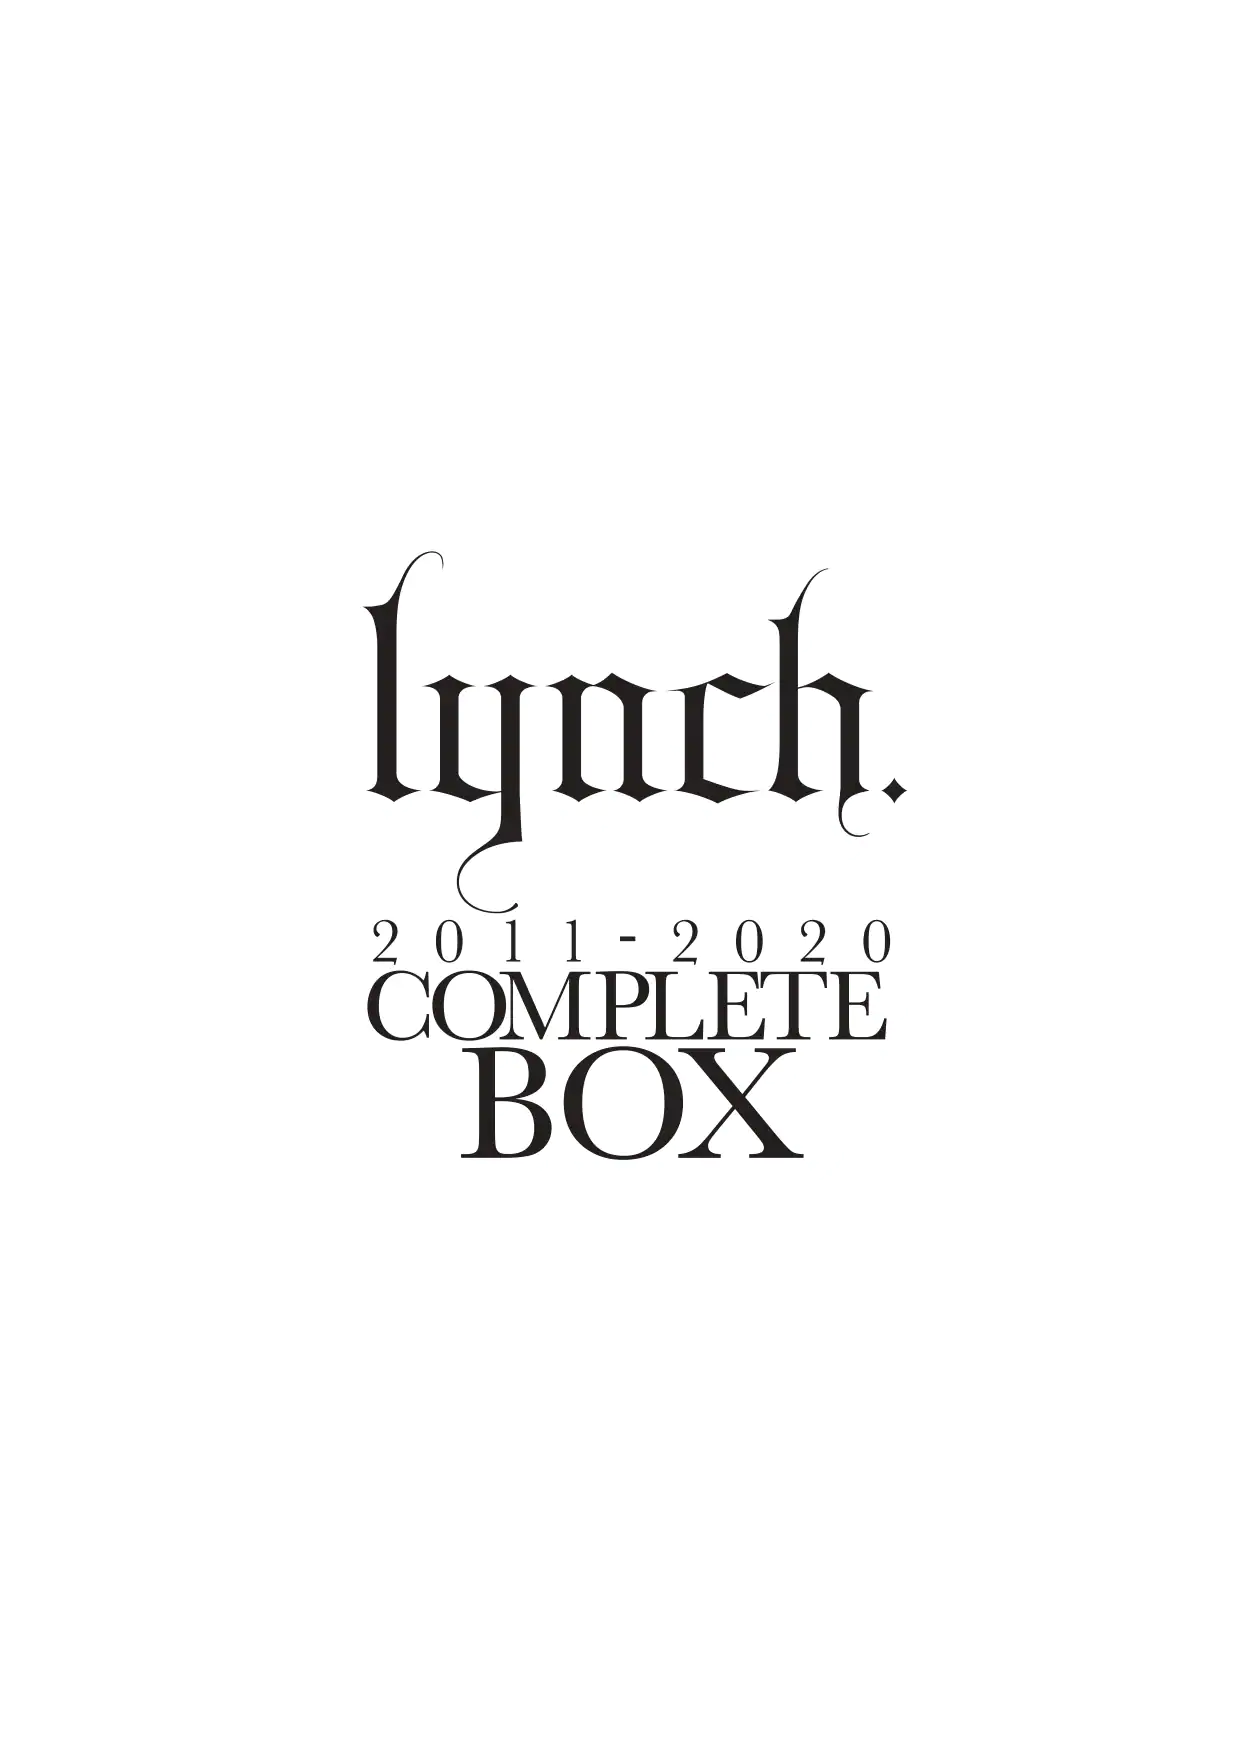 lynch.『2011-2020 COMPLETE BOX』 12.27.21 Release - News - JROCK ONE